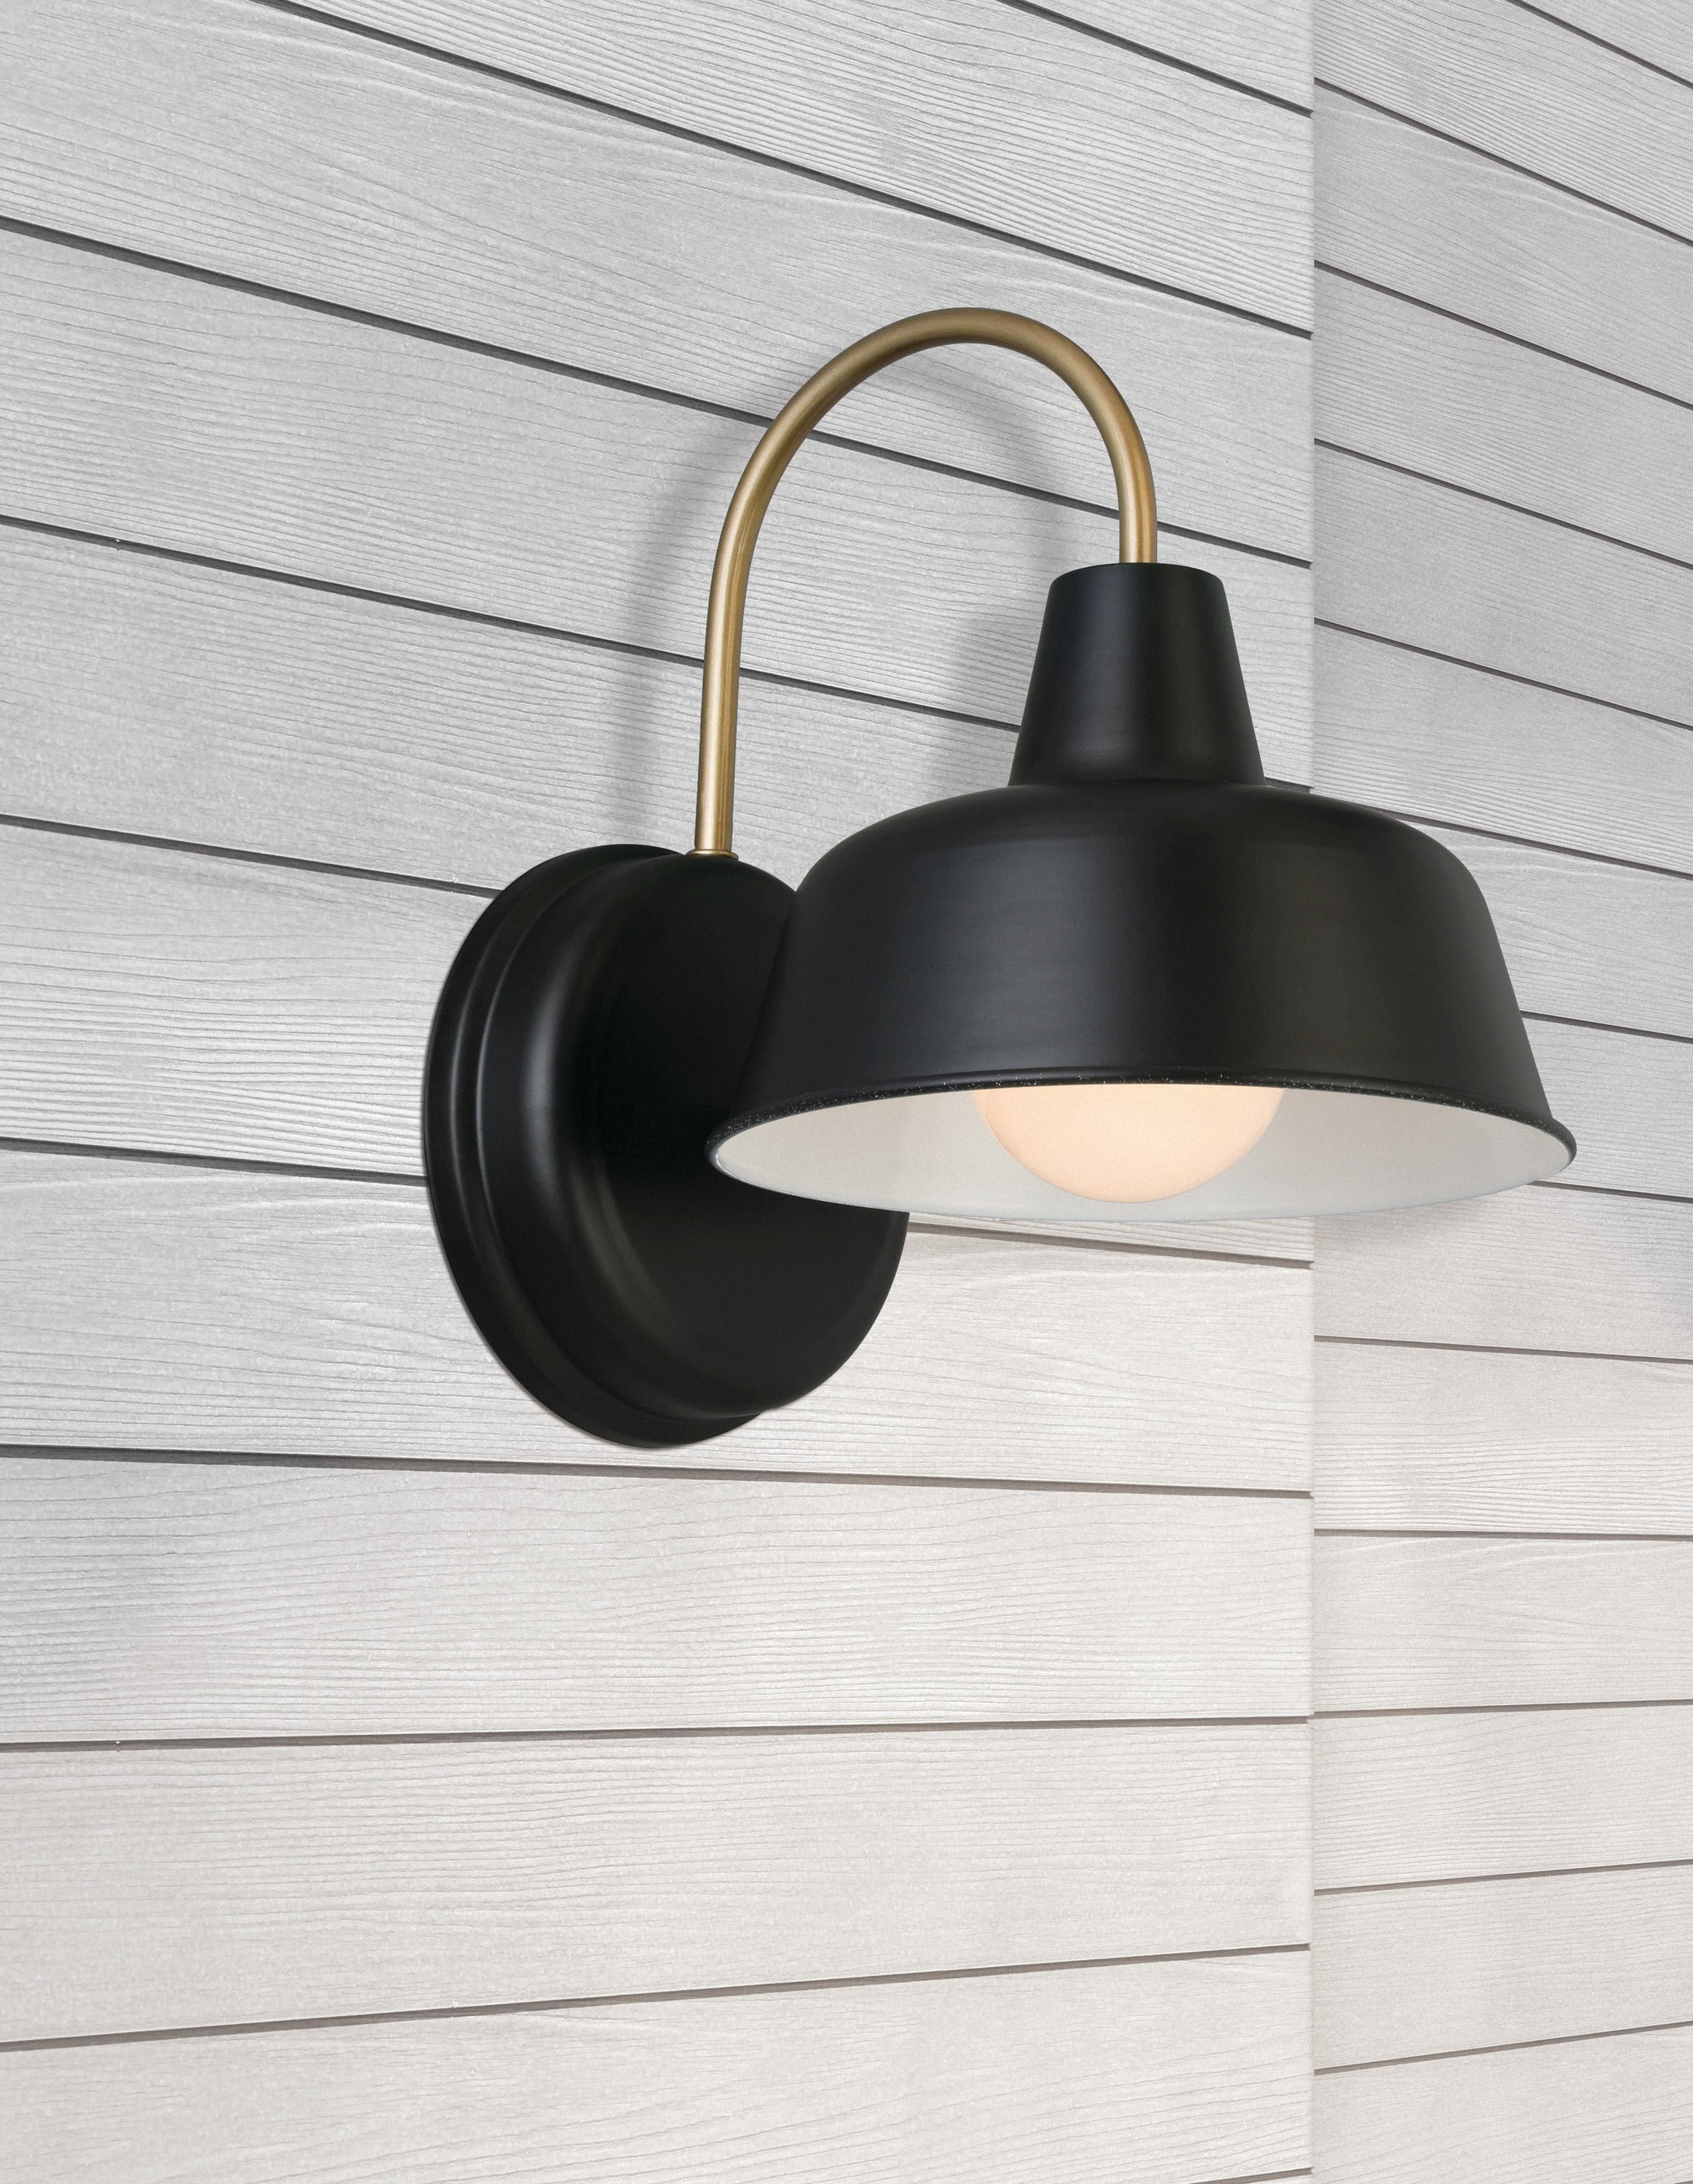 Mason Barn Light Indoor/Outdoor Wall Mount Modern Industrial Farmhouse  Design House Wall Light for Patio, Garage, Bathroom, Office, Kitchen,  8-Inch, Matte Black and Gold, 588285